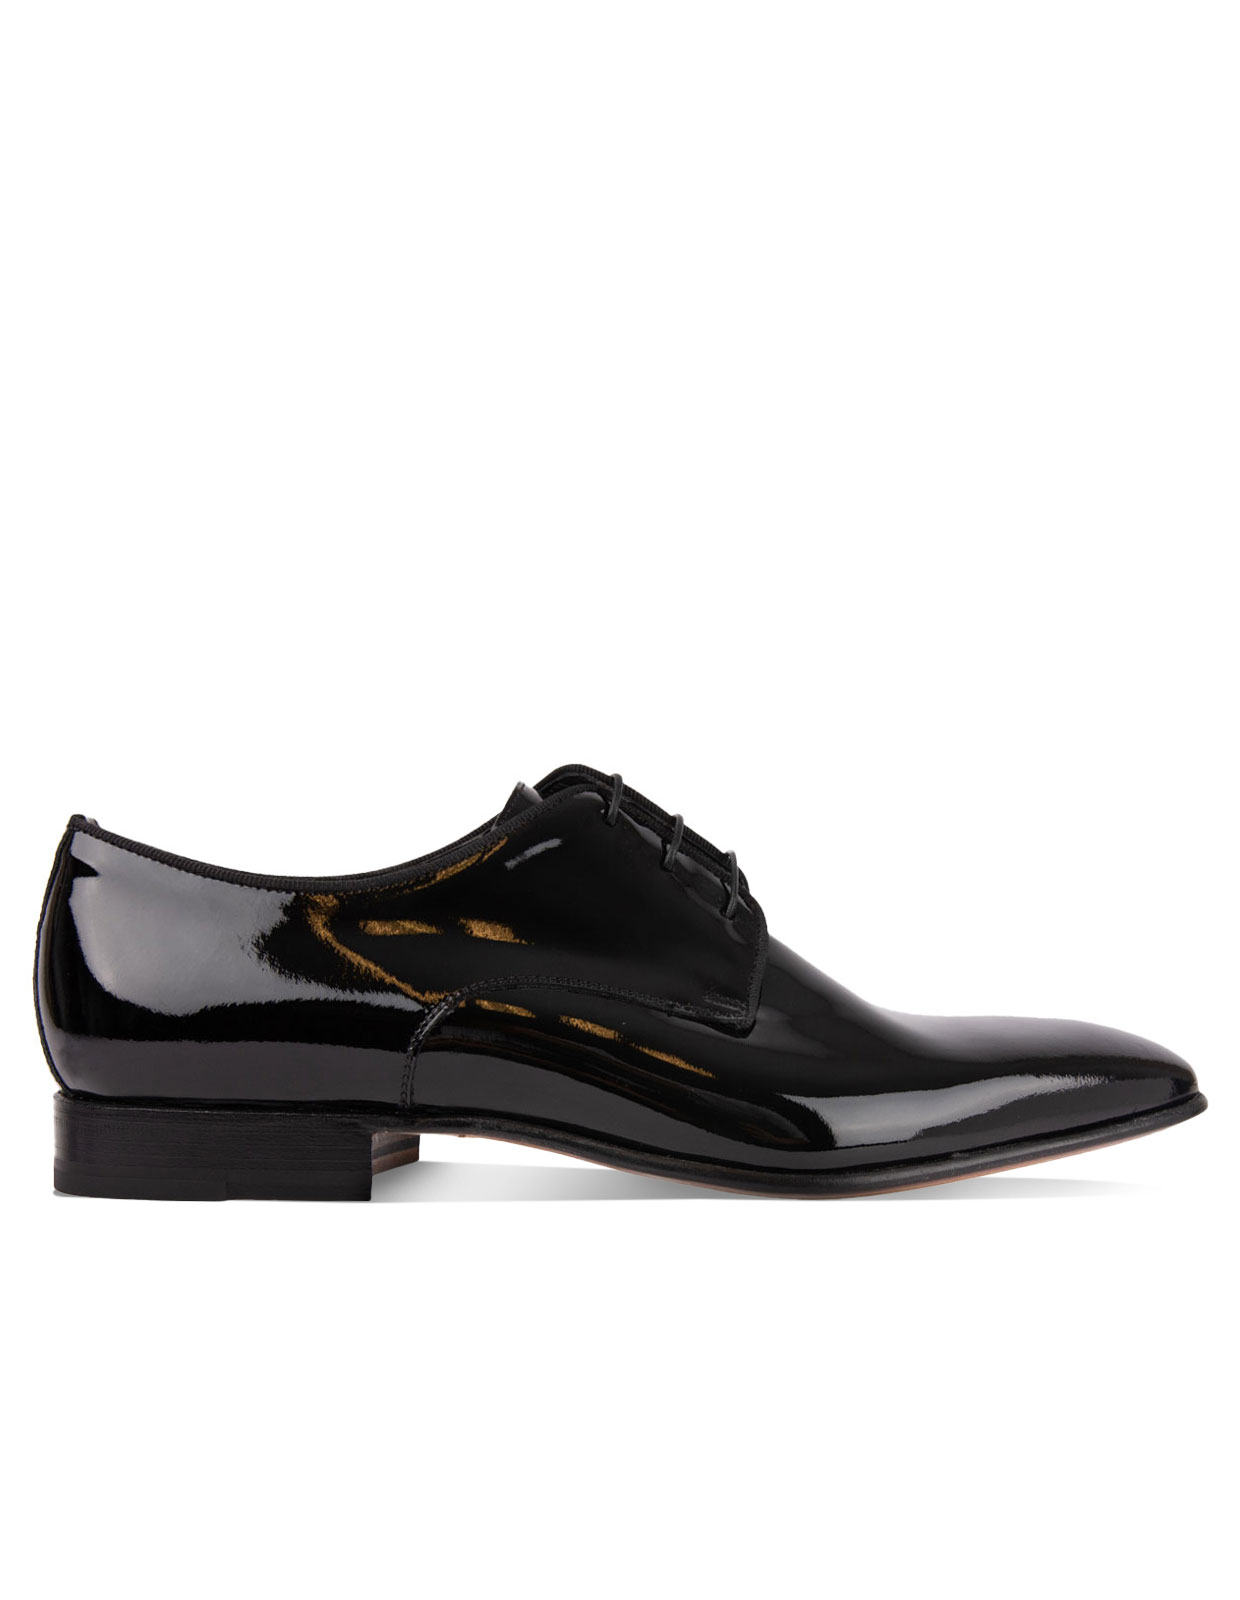 Lille Patent Leather Derby Shoes Black Stl 9